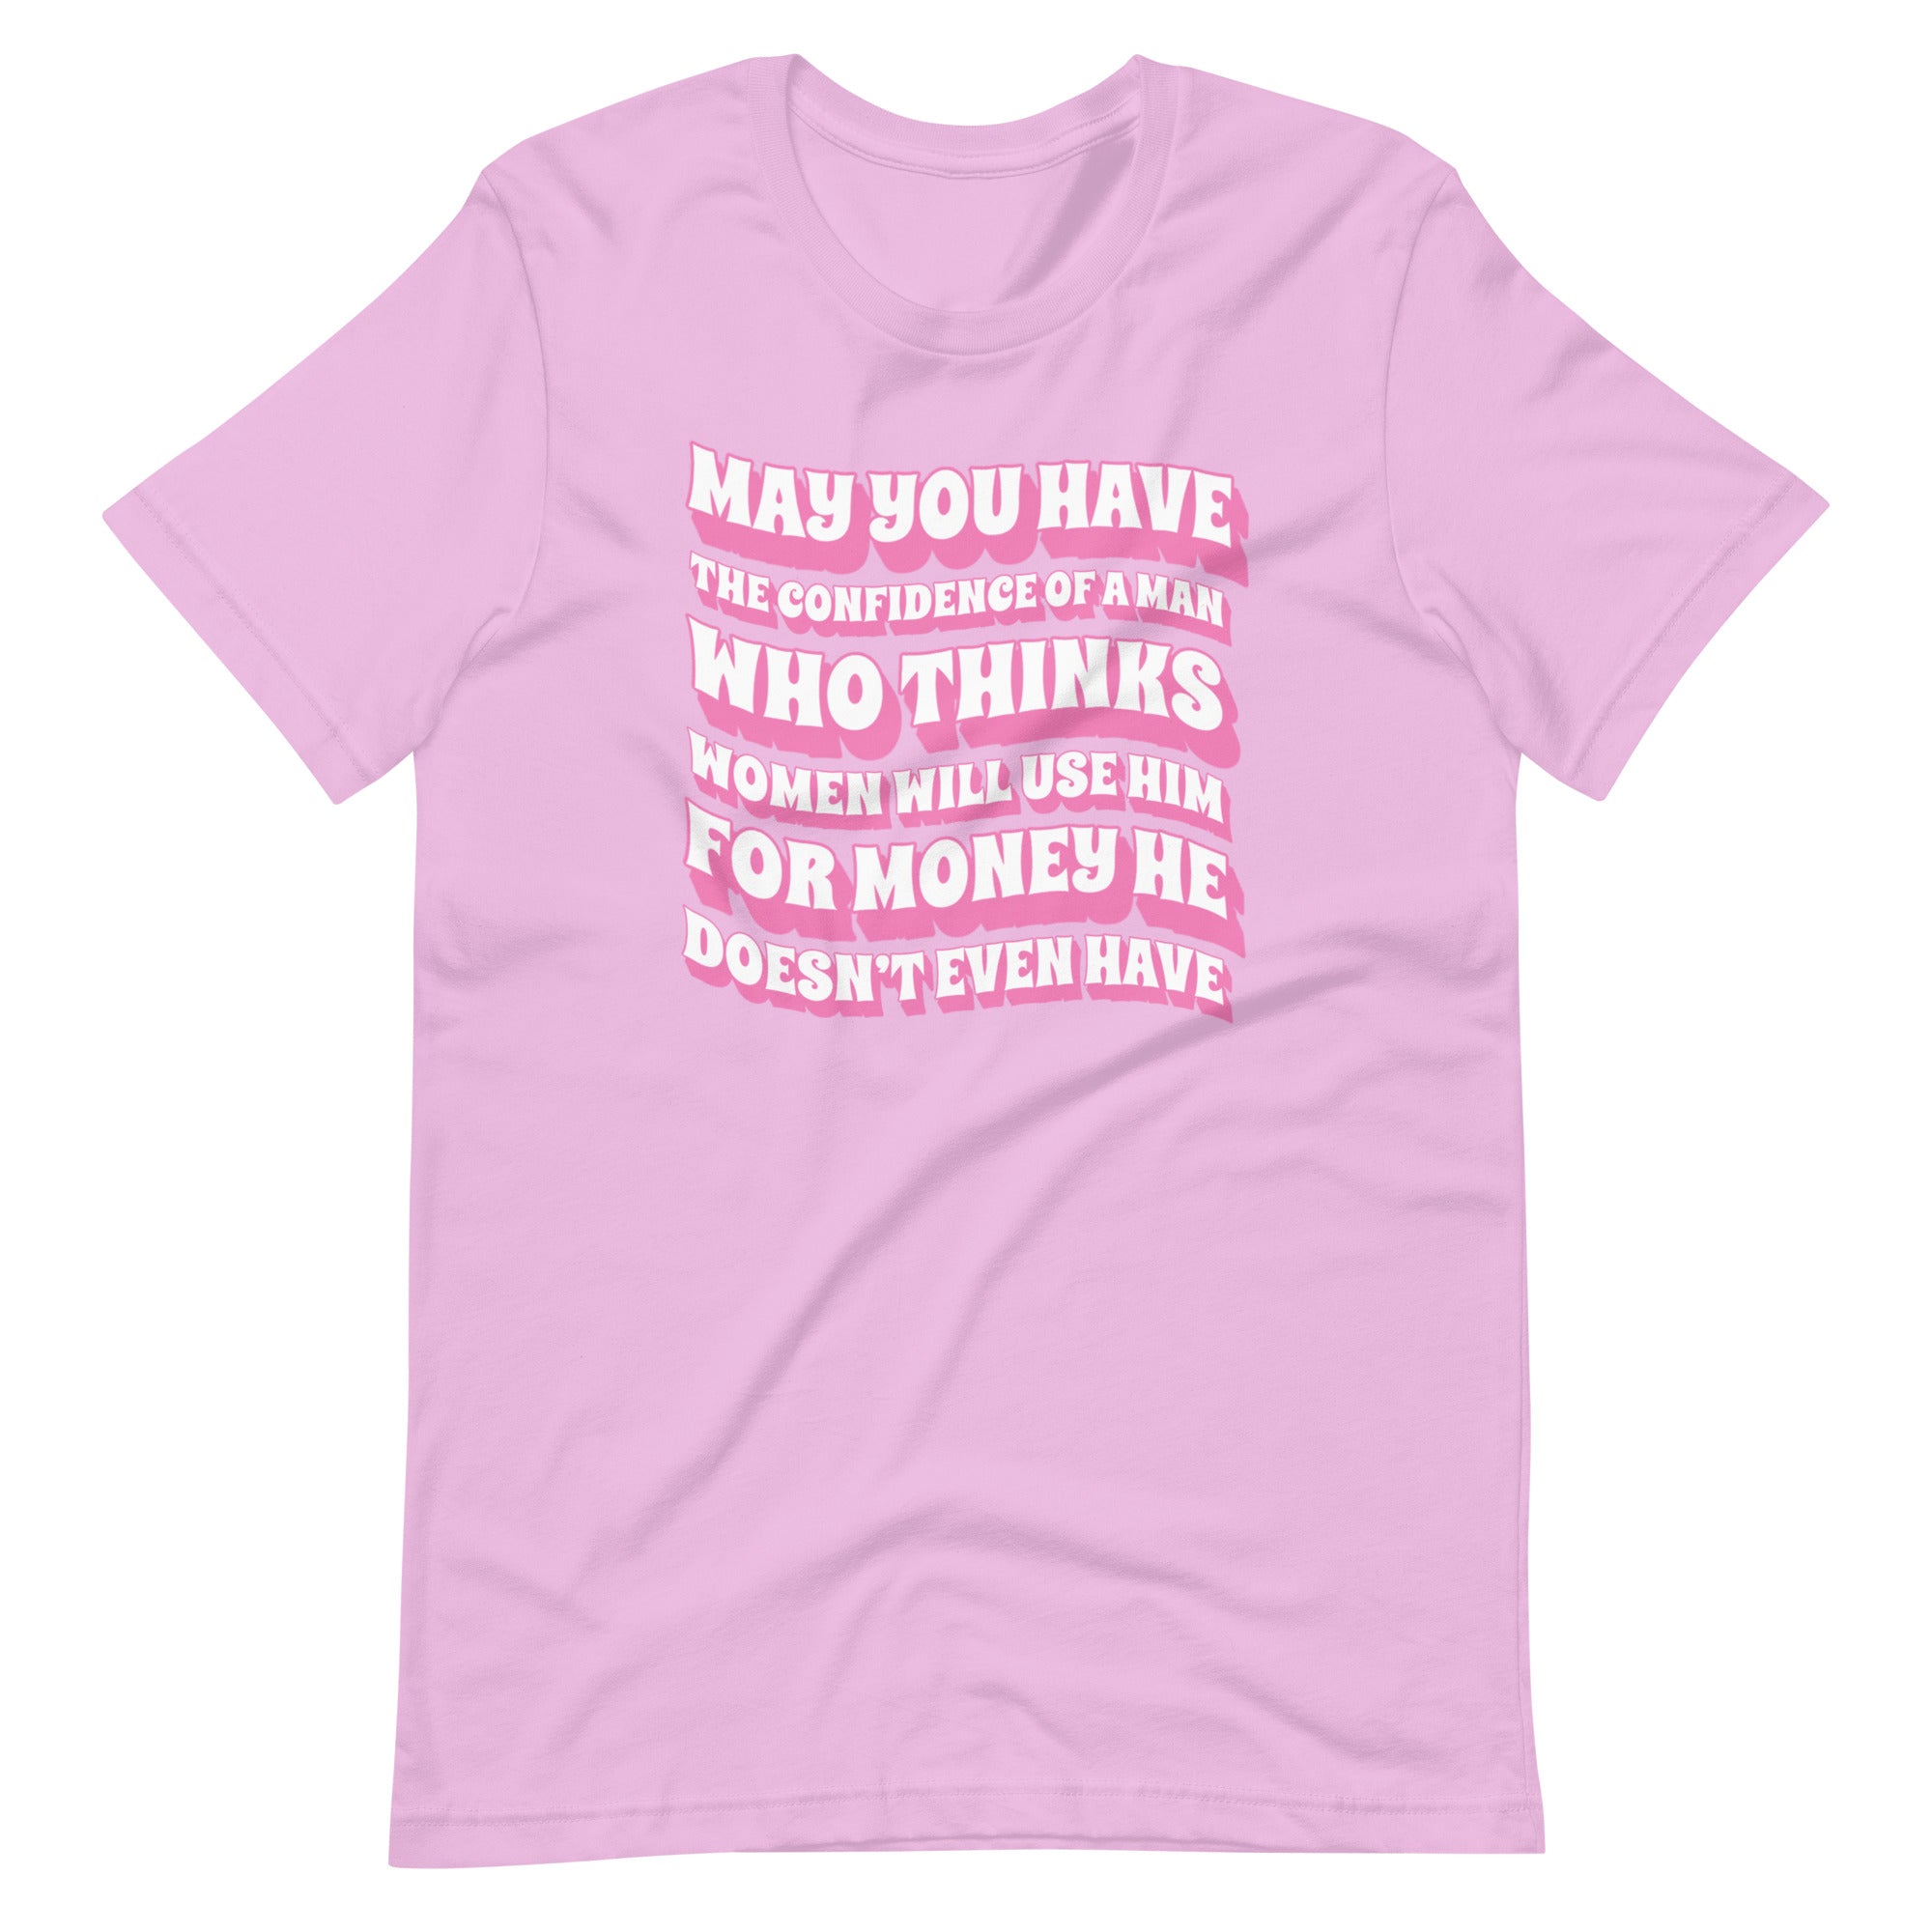 May You Have The Confidence Unisex Feminist T-shirt- Shop Women’s Rights T-shirts - Feminist Trash Store - Lilac